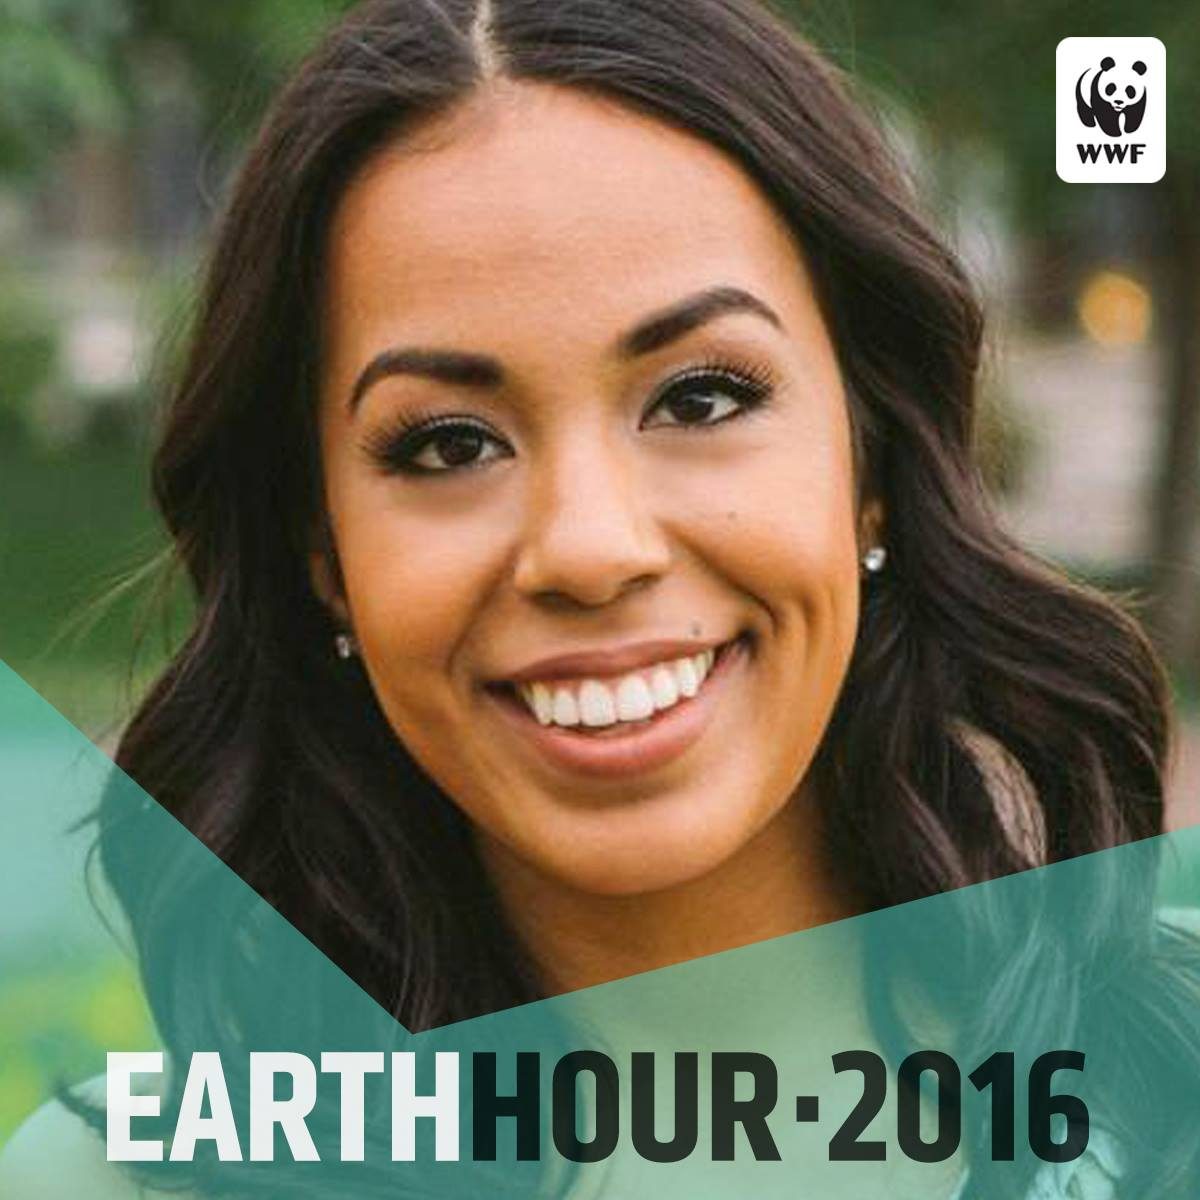 #EarthHour 2016: Change your profile photos for climate action